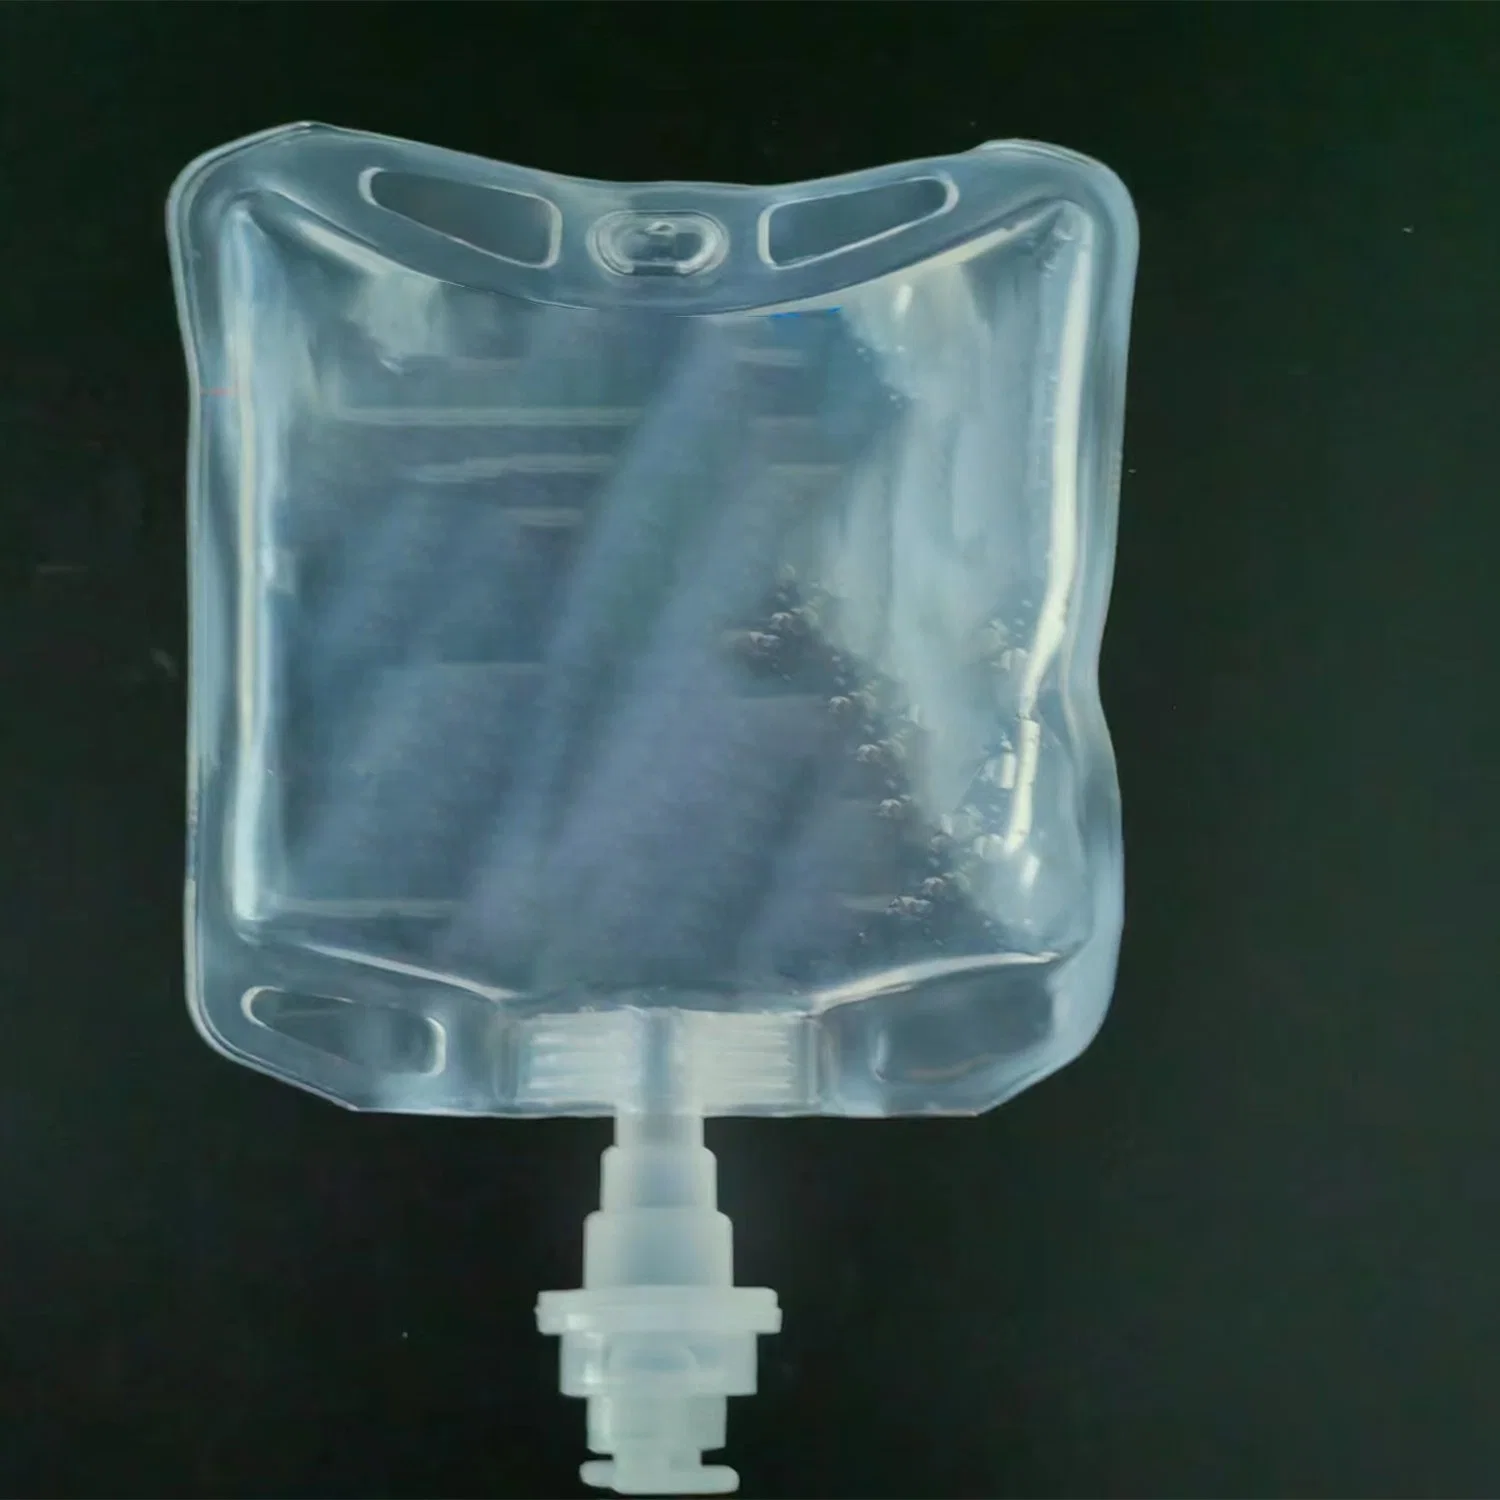 Siny Disposable Medical Supply Sterile Safety Hospital Drip Bag